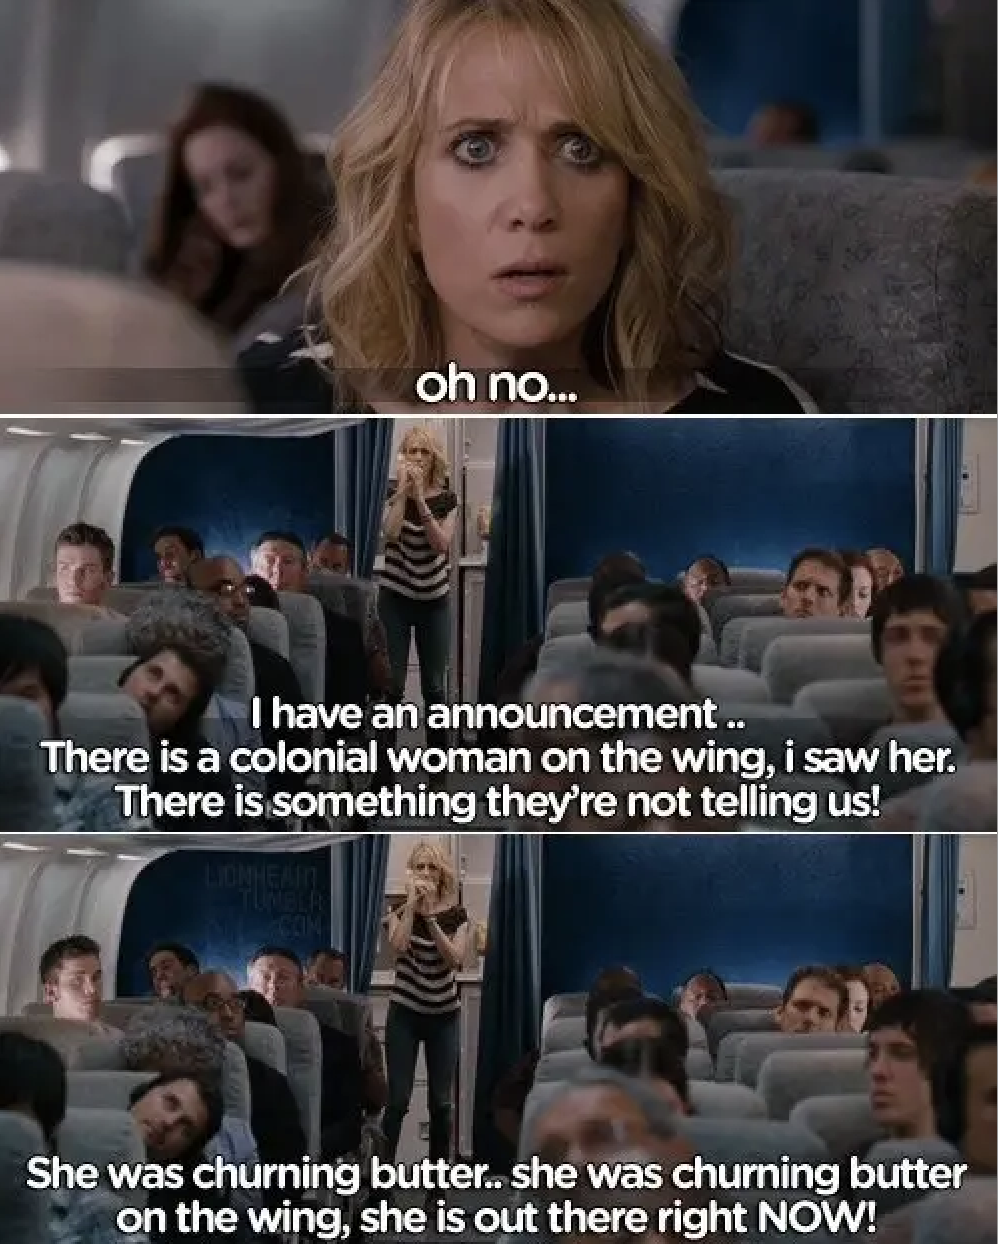 Kristen Wiig on a plane telling the passengers that a colonial woman is on the plane